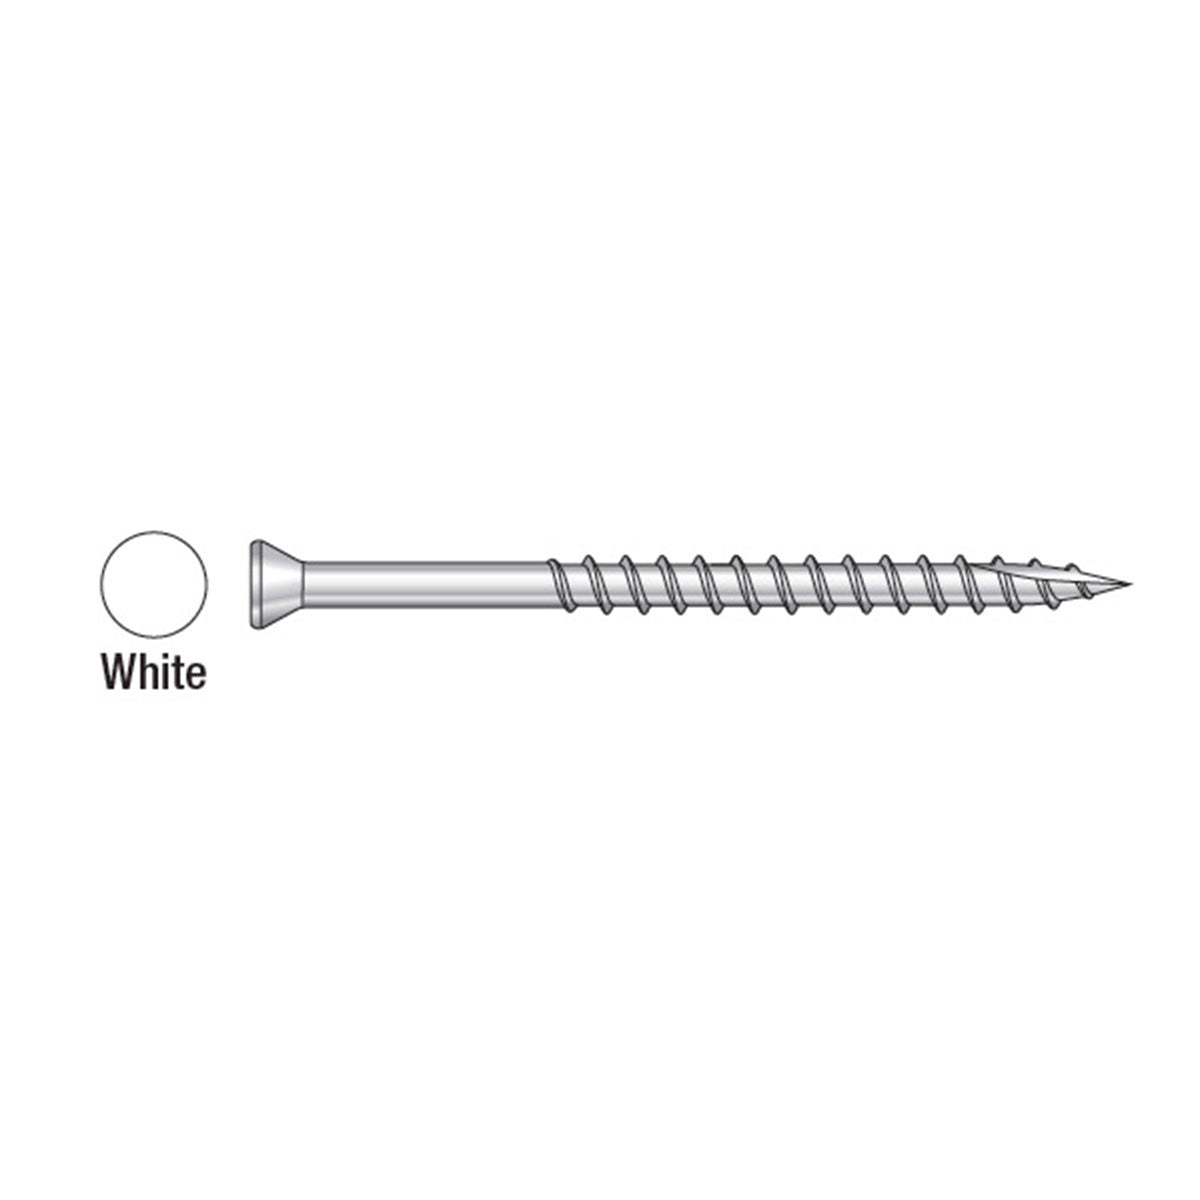 T07225FT1WH01 #7 2-1/4" Type 316 Stainless Steel 6 Lobe Drive Trim Head Screws Painted White - 1 Pound Box